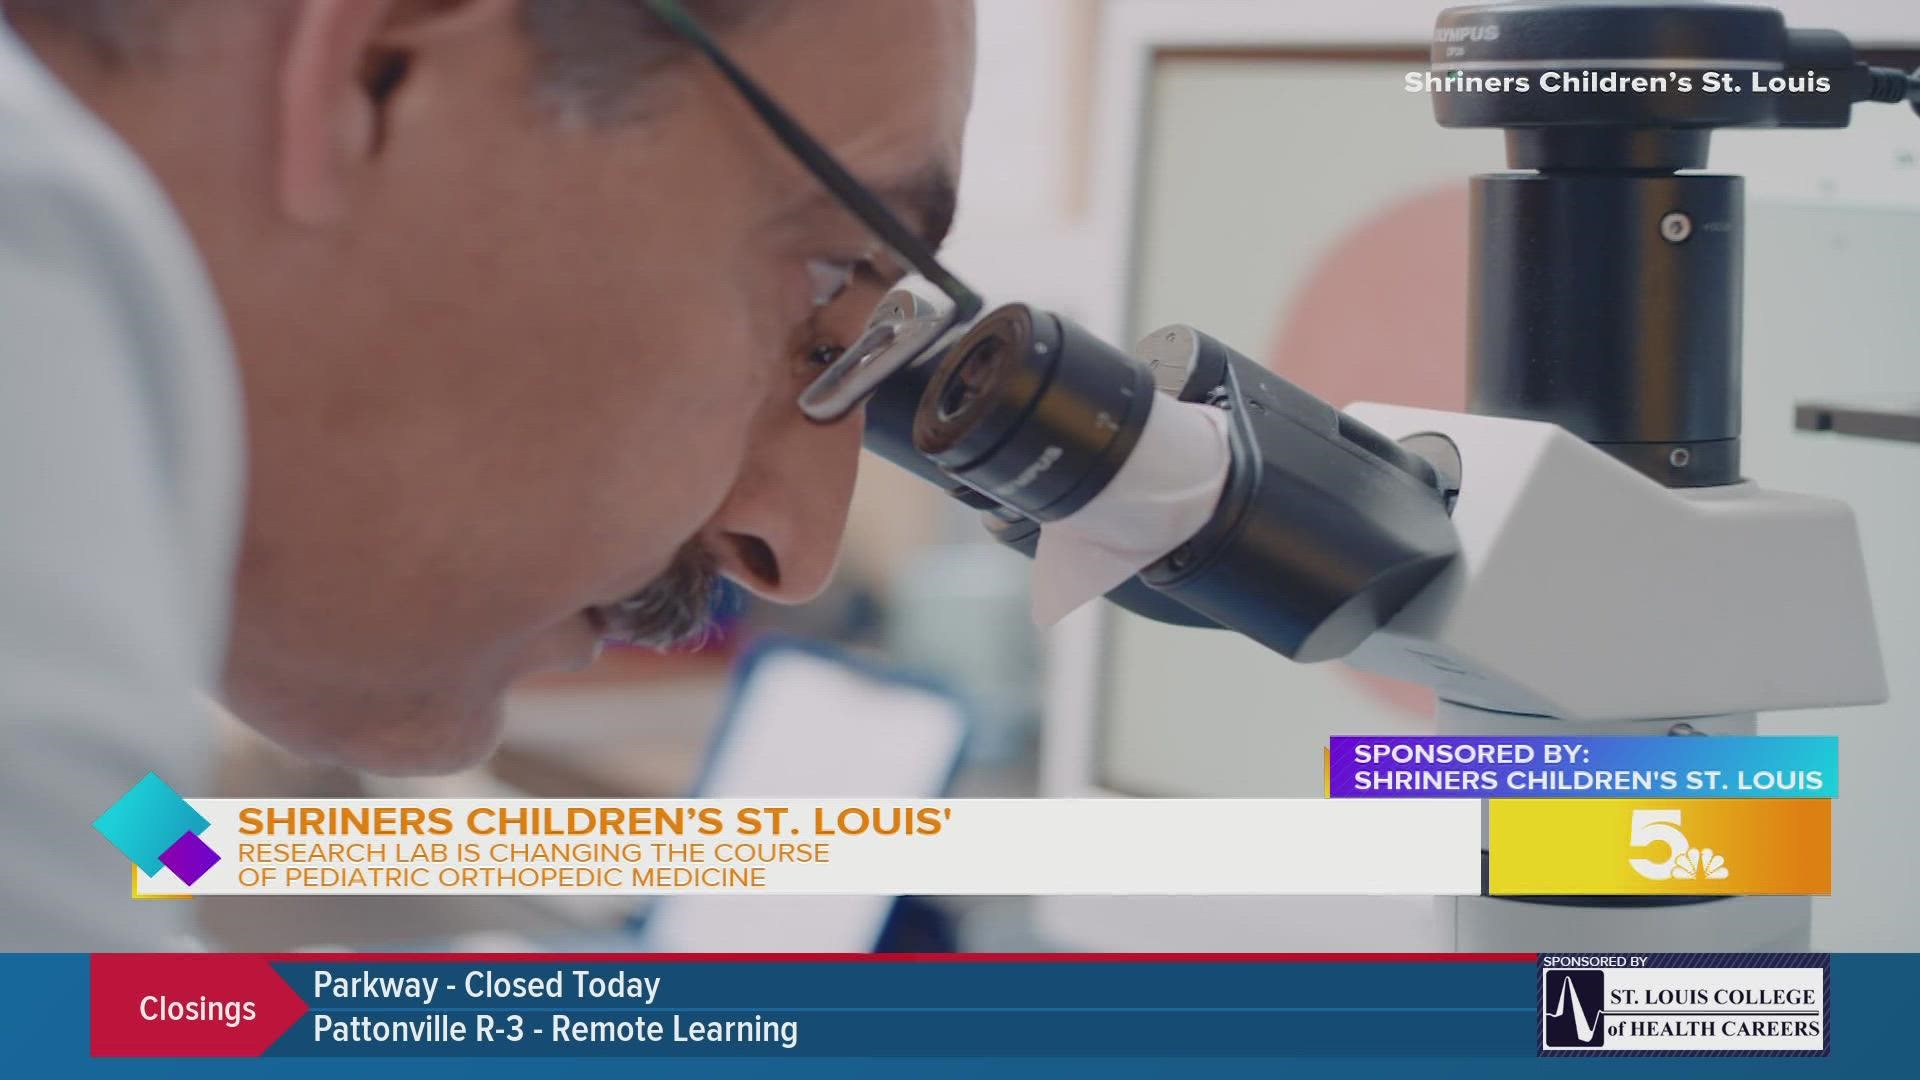 For years, Farshid Guilak, Ph.D., research director at Shriners Children’s St. Louis, and his team have led innovation in the area of regenerative medicine.